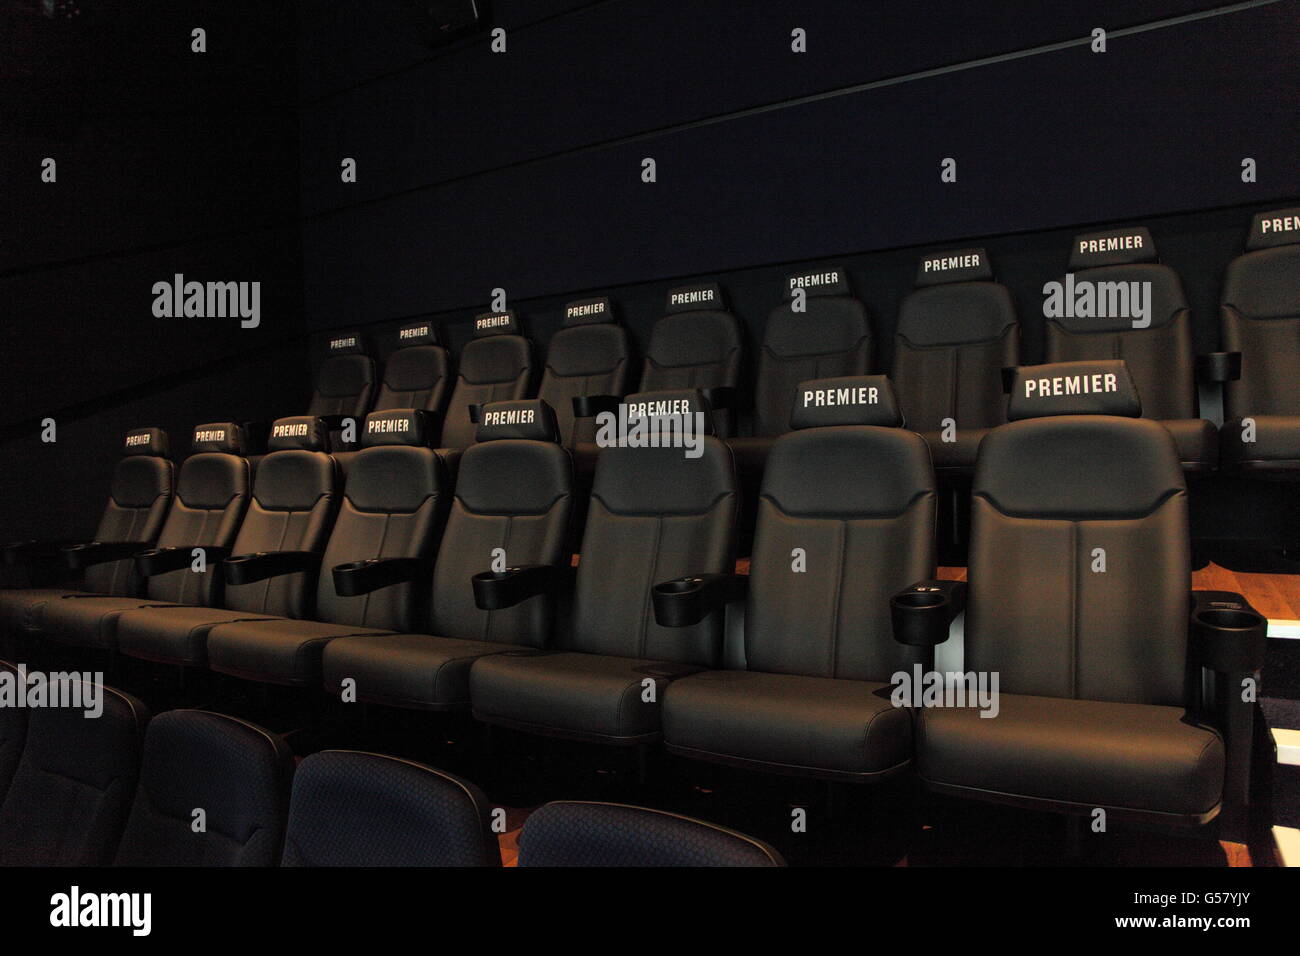 Premier seating inside an Odeon multiplex cinema at New Square, West Bromwich, Stock Photo